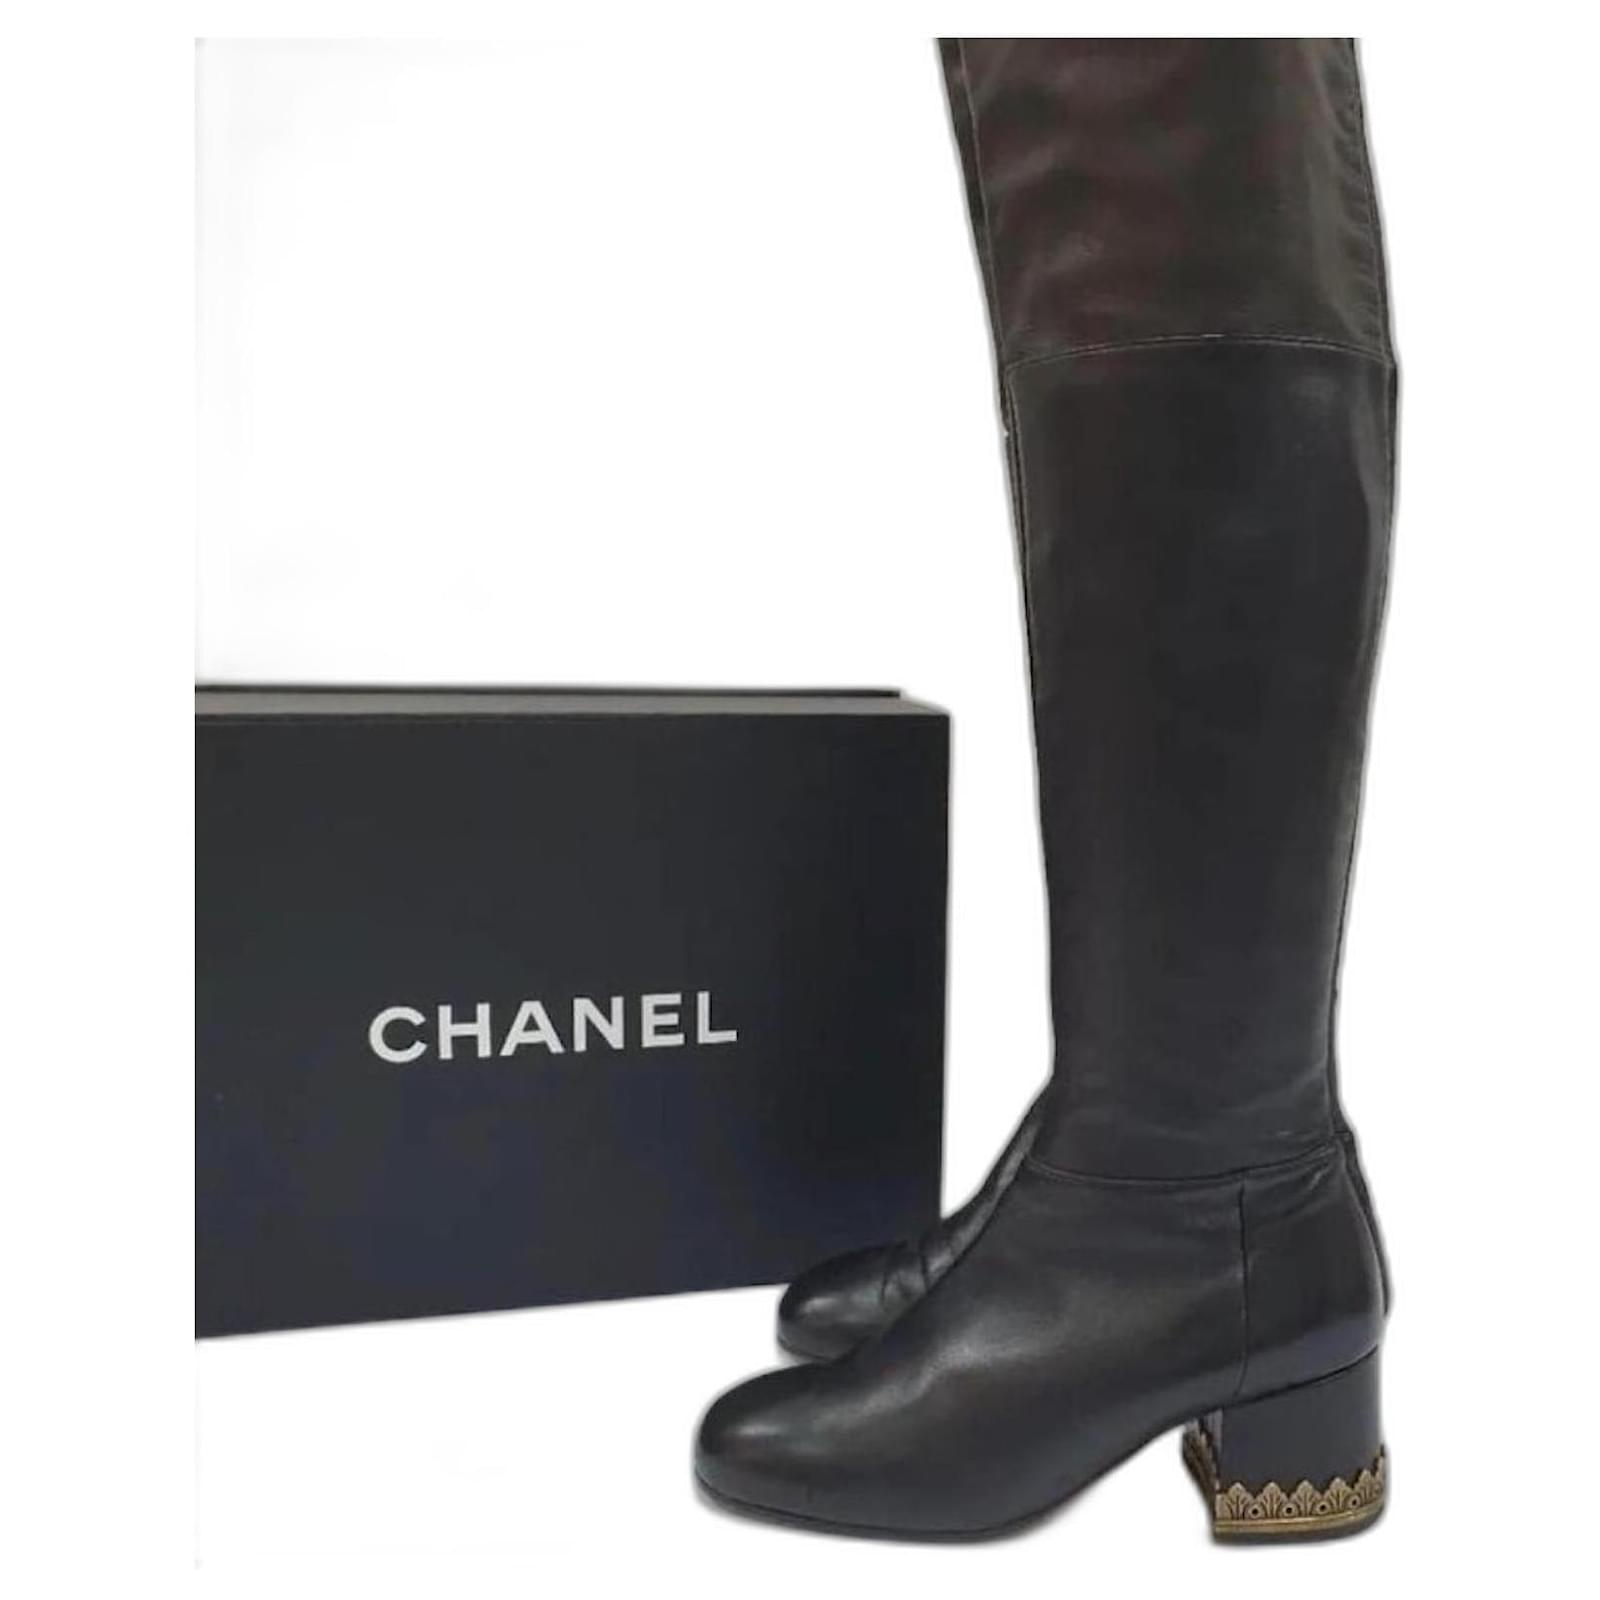 Boots Chanel Chanel Black Leather Thigh High Over The Knee Boots Size 38 FR